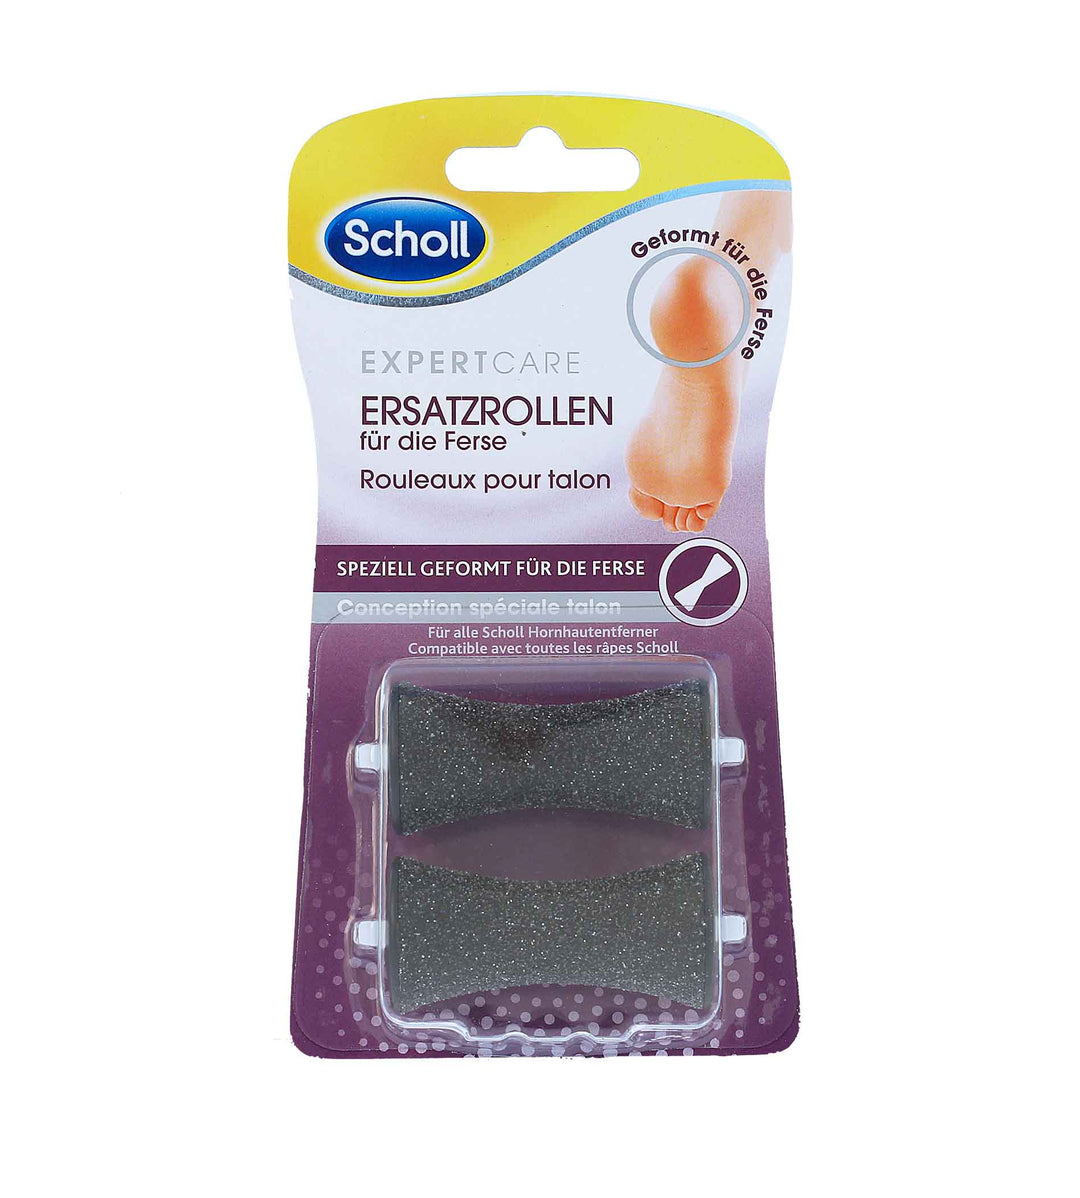 SCHOLL Velvet Smooth Spare Head For Cracked Heels 2pcs 1 PCS